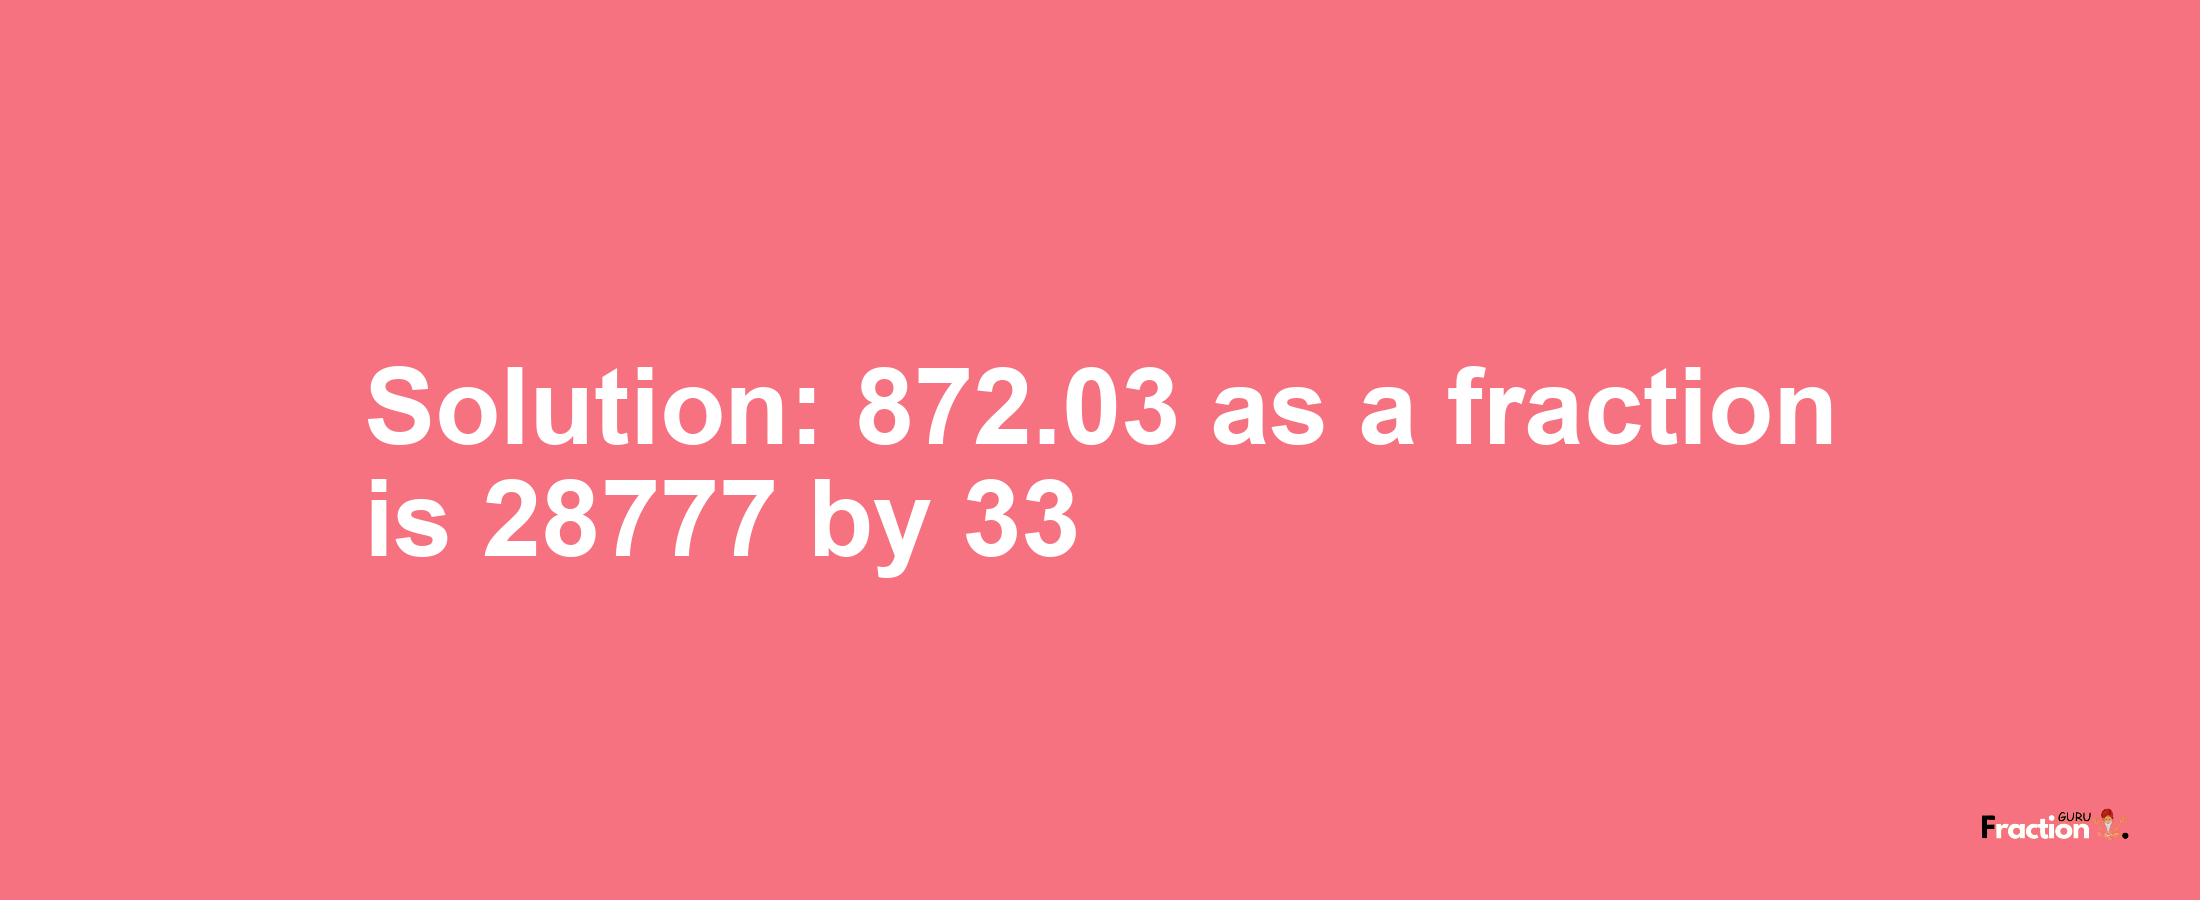 Solution:872.03 as a fraction is 28777/33